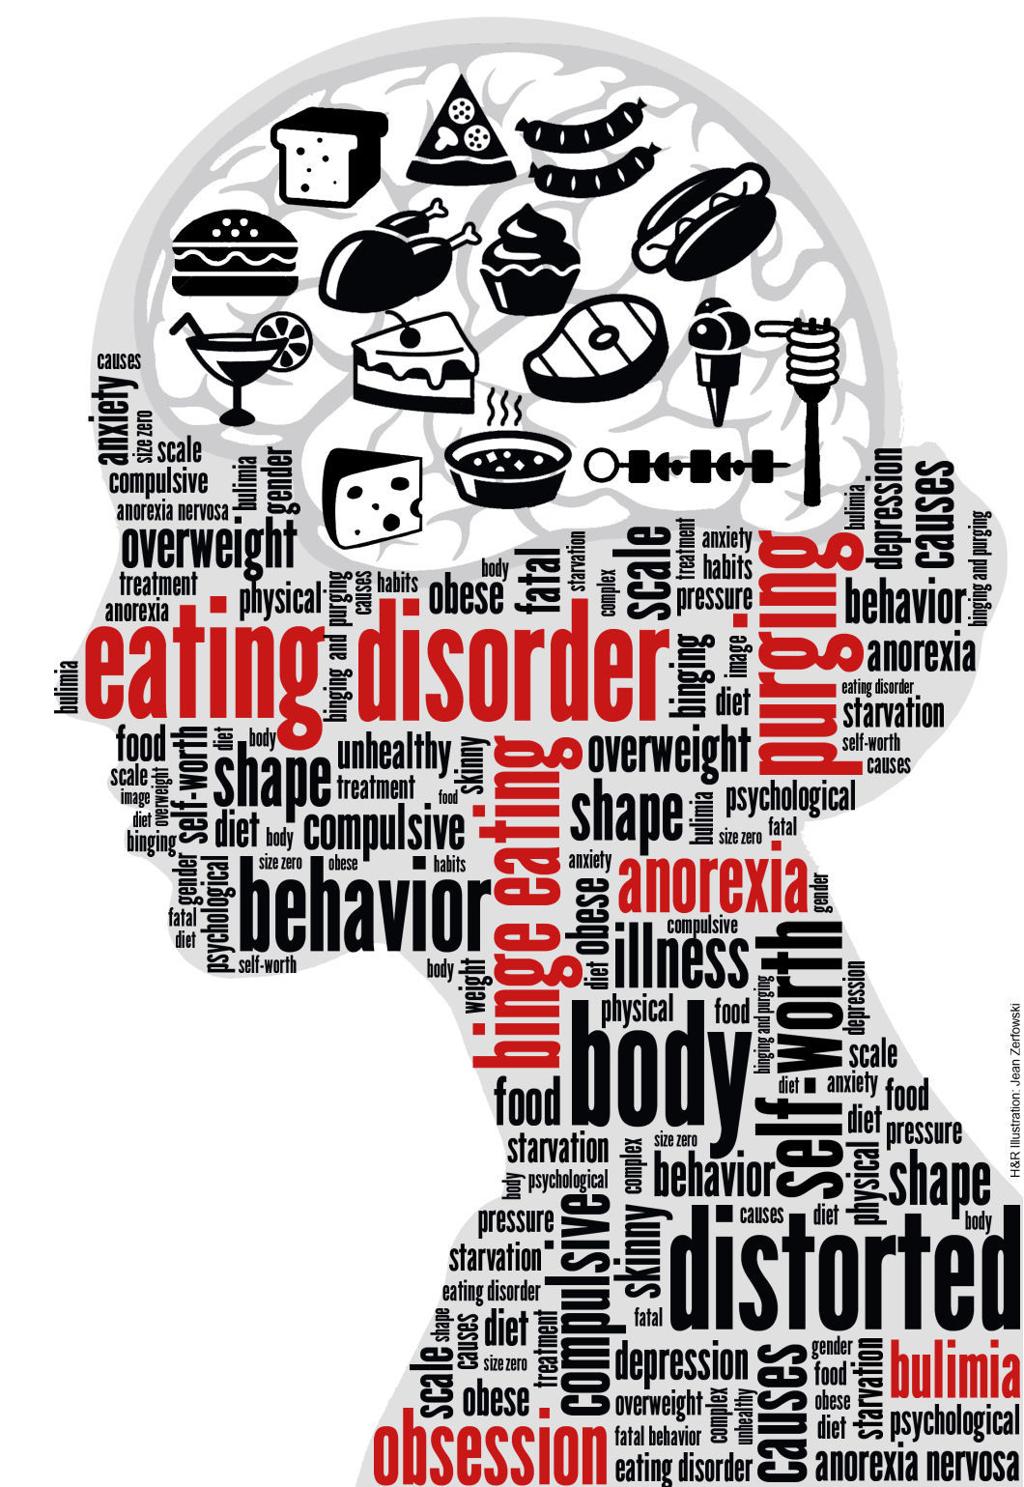 Eating disorders remain deadly